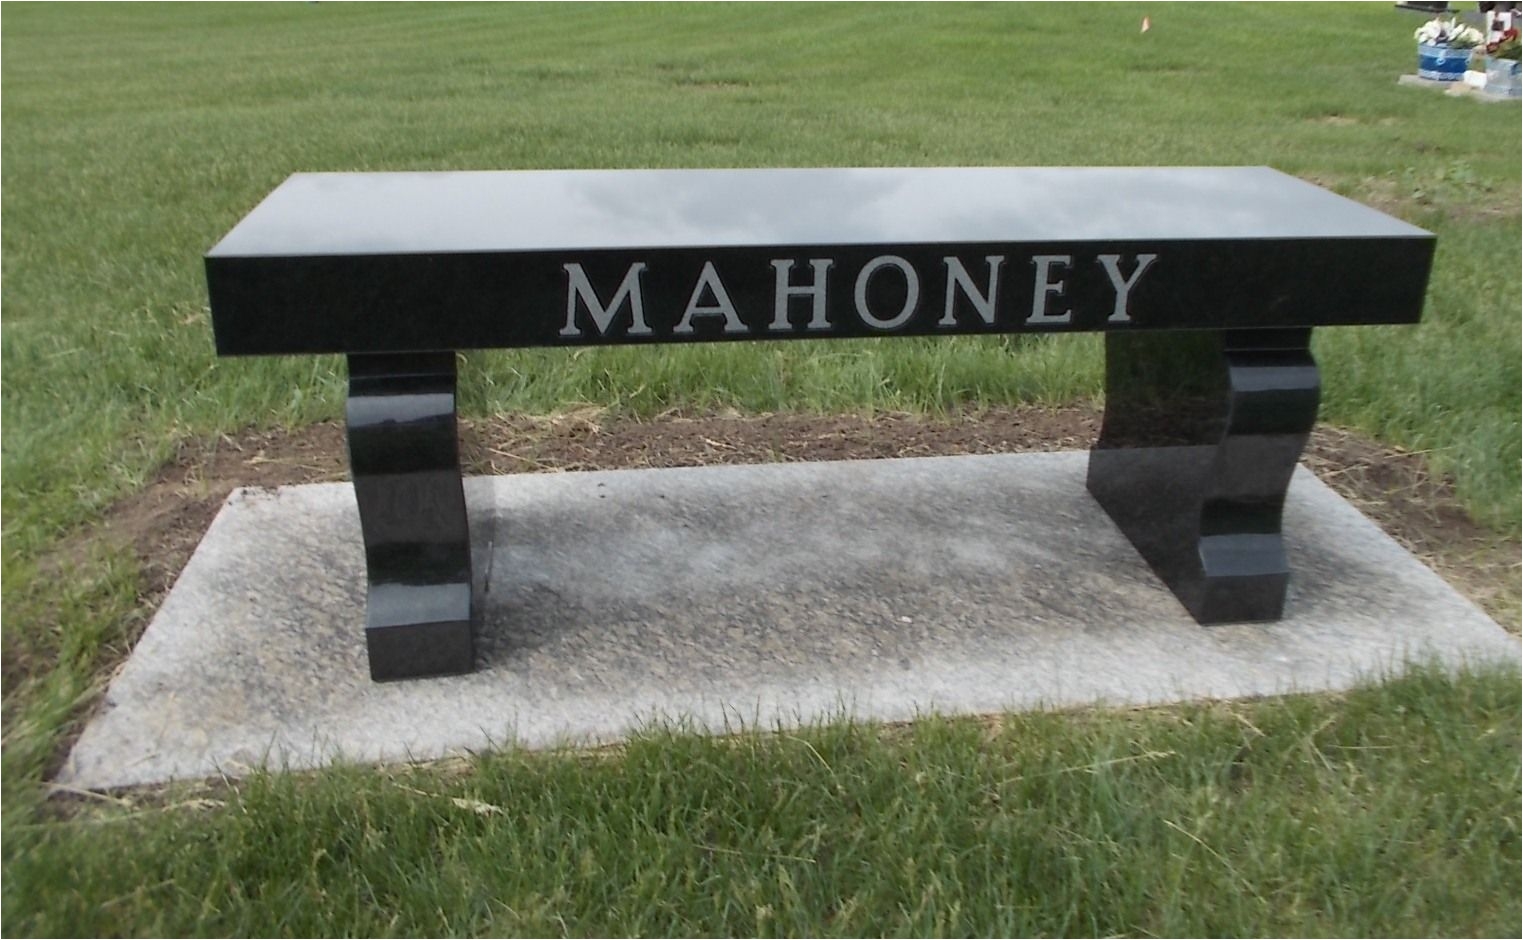 39 best benches images on pinterest in 2018 bench benches and cemetery